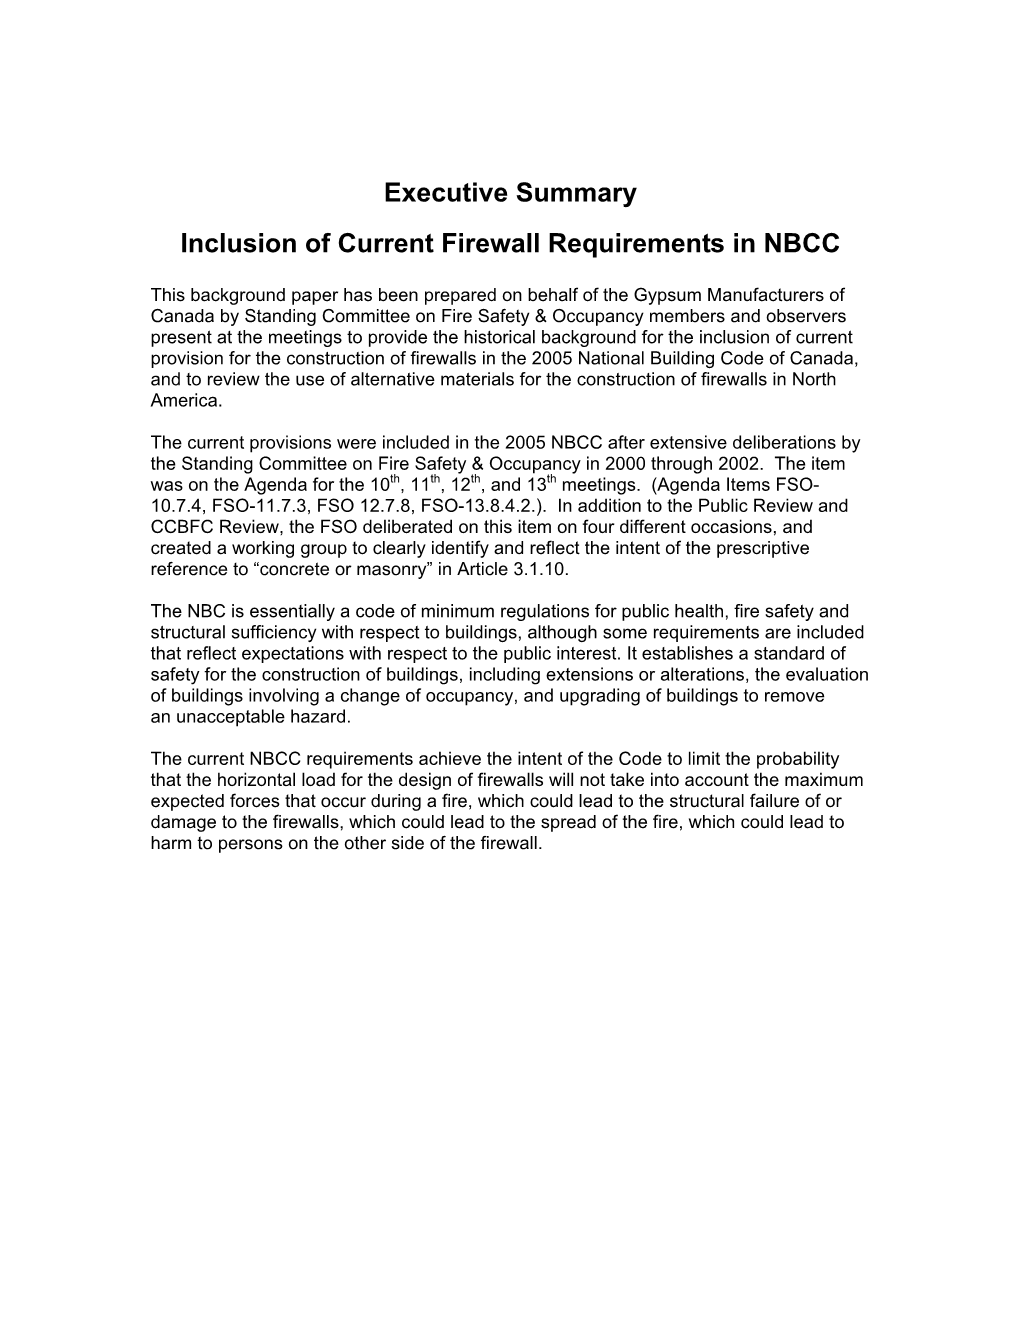 Executive Summary Inclusion of Current Firewall Requirements in NBCC